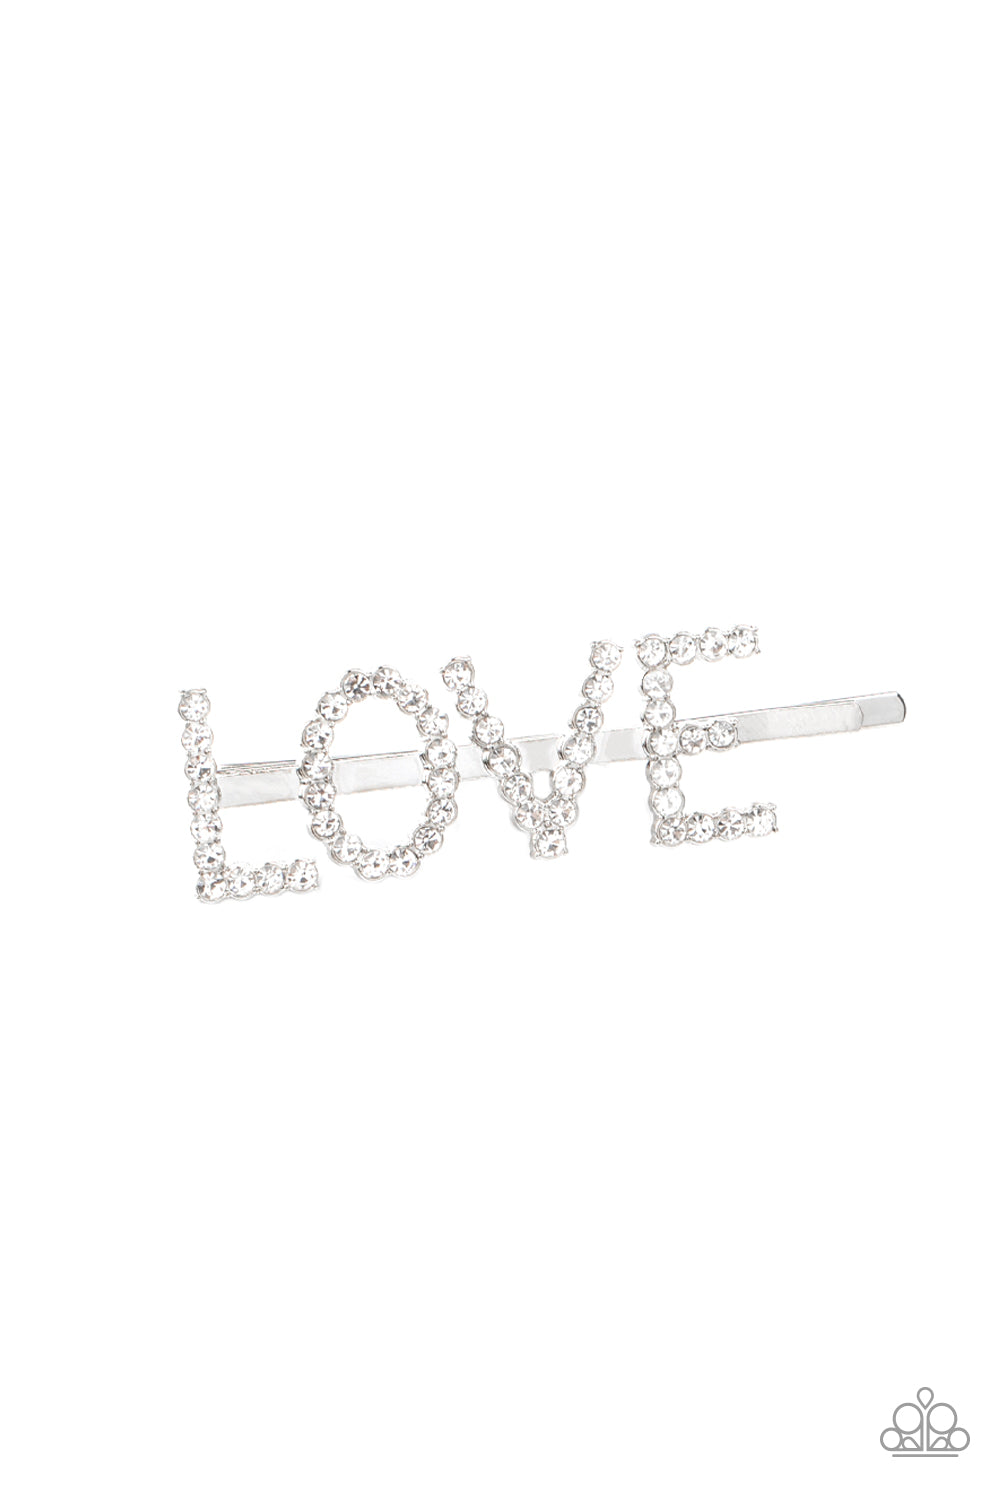 Paparazzi ♥ All You Need Is Love - White ♥  Hair Clip